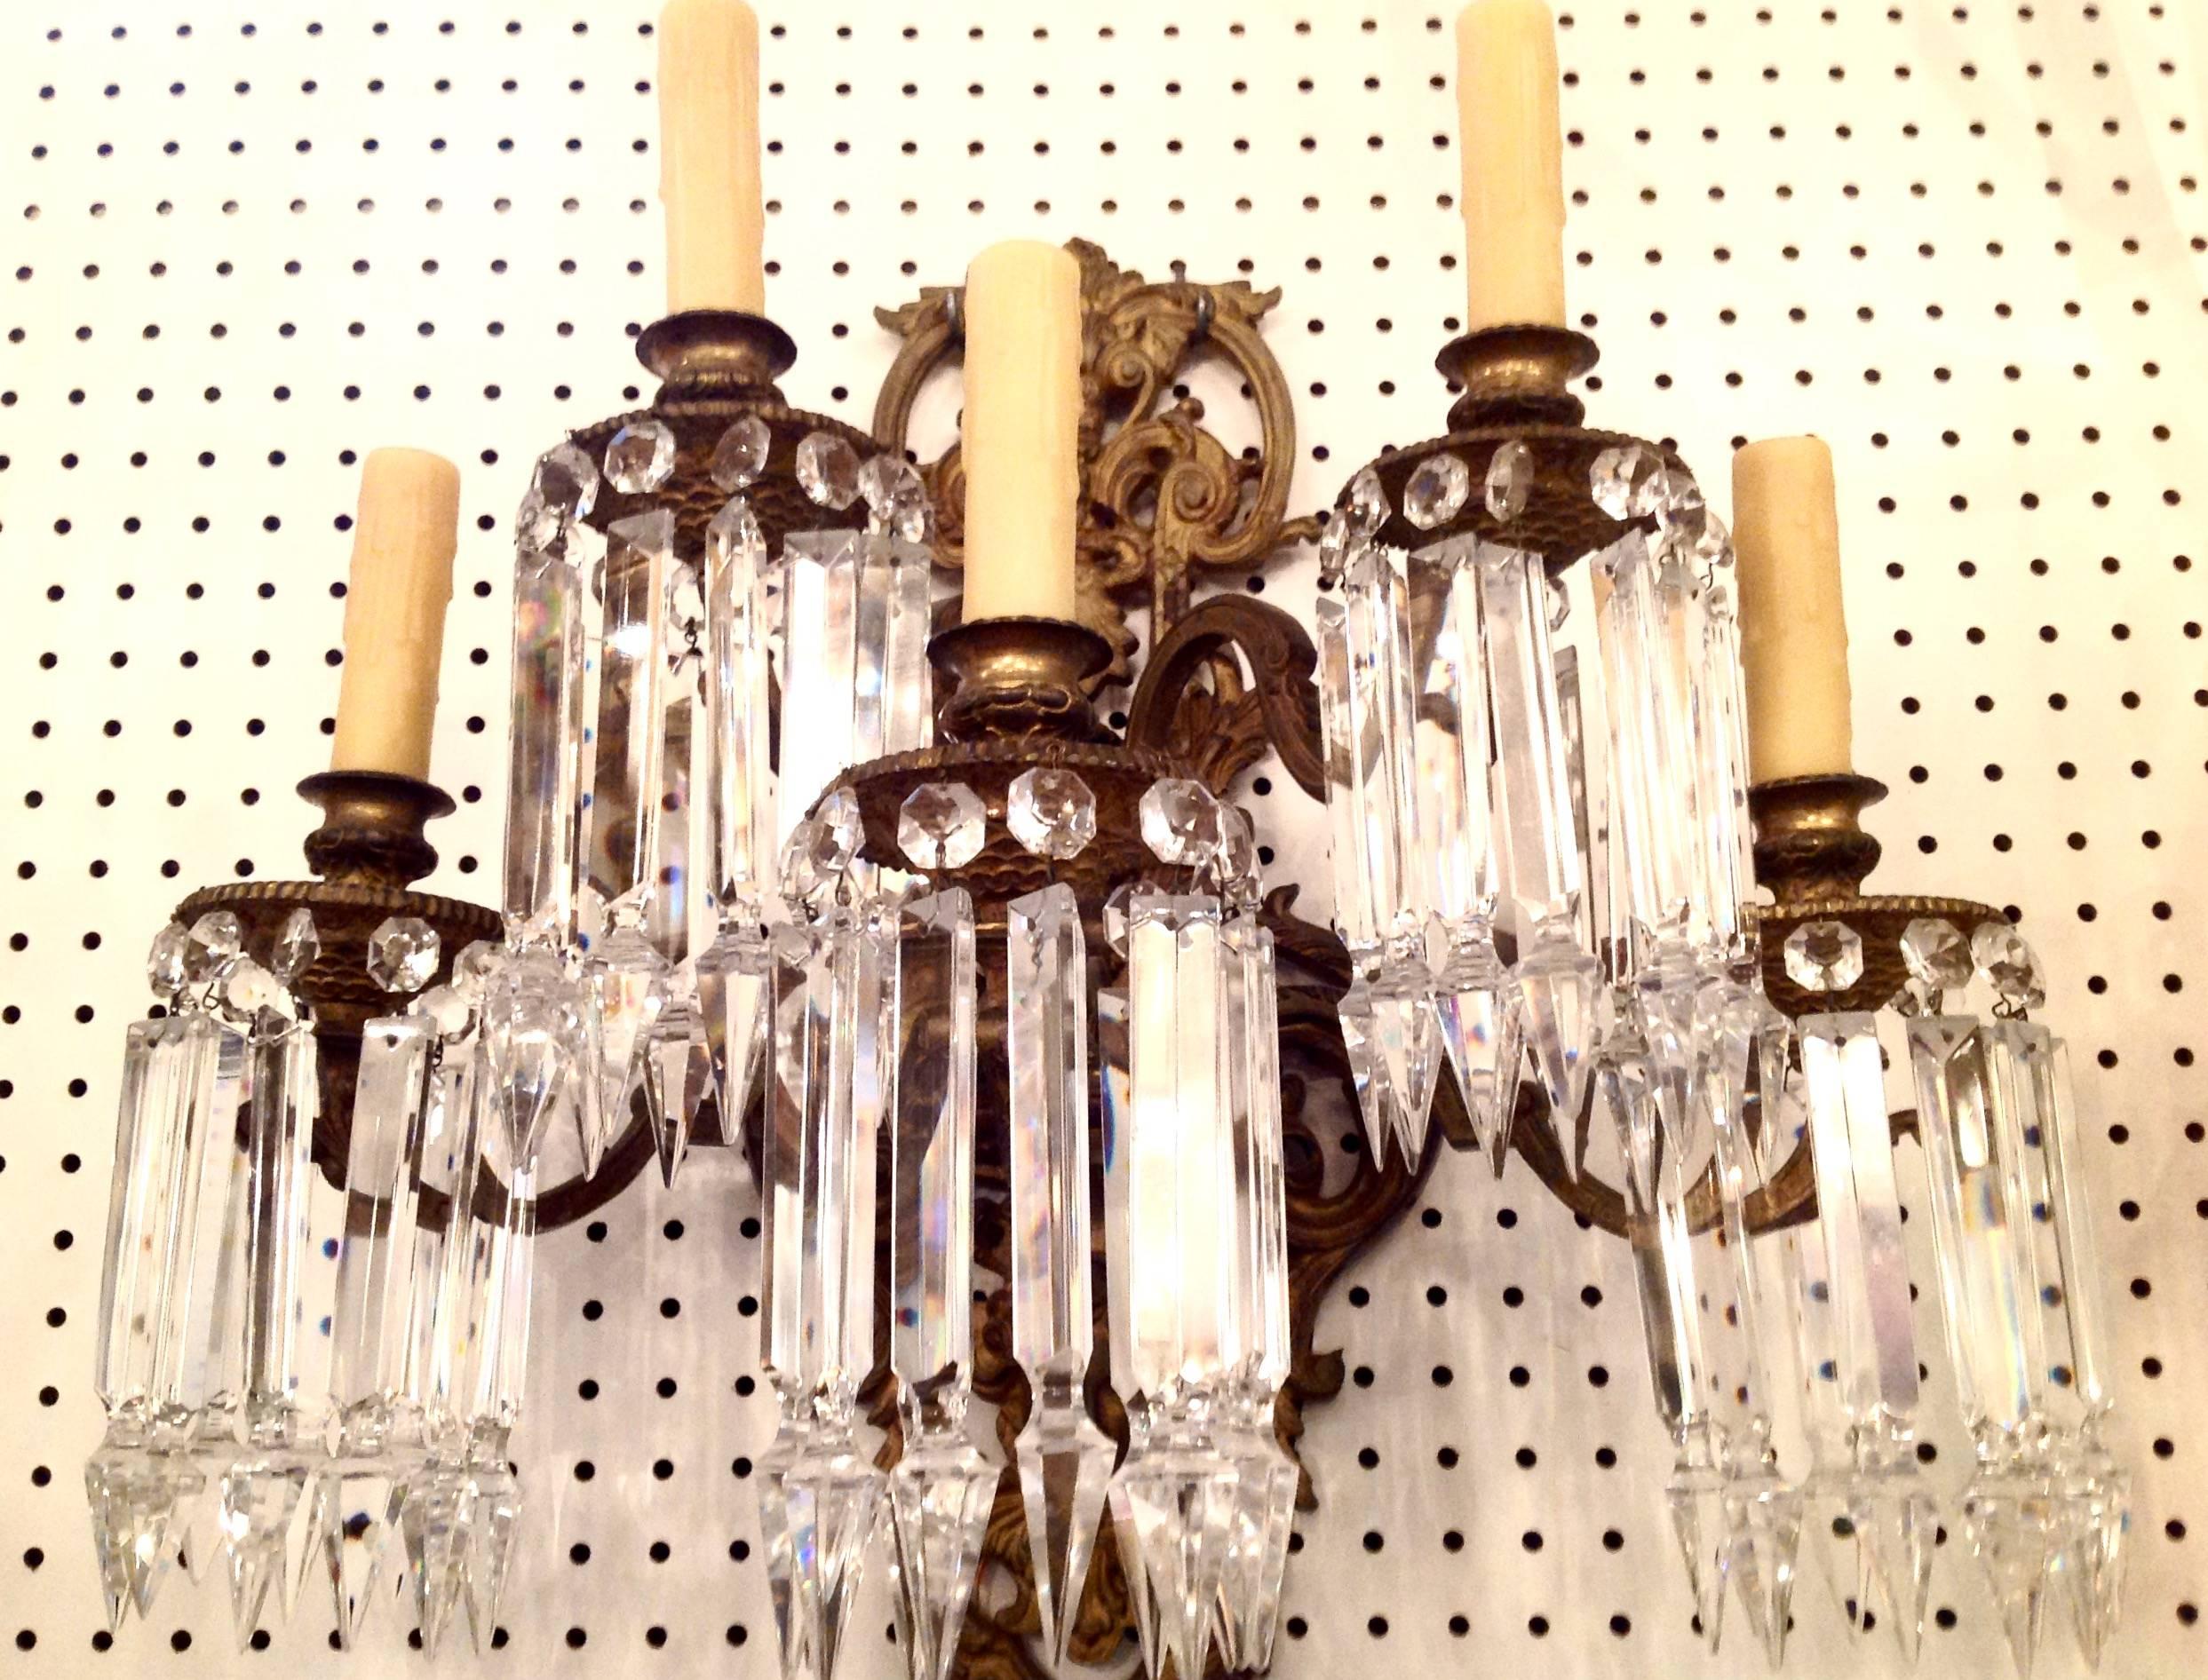 Pair of Grande Victorian bronze wall sconces, circa 1920. Over the top cut spear crystal prisms. Measure 22 inches wide by 22 inches high. Have been restored and rewired to UL standards.